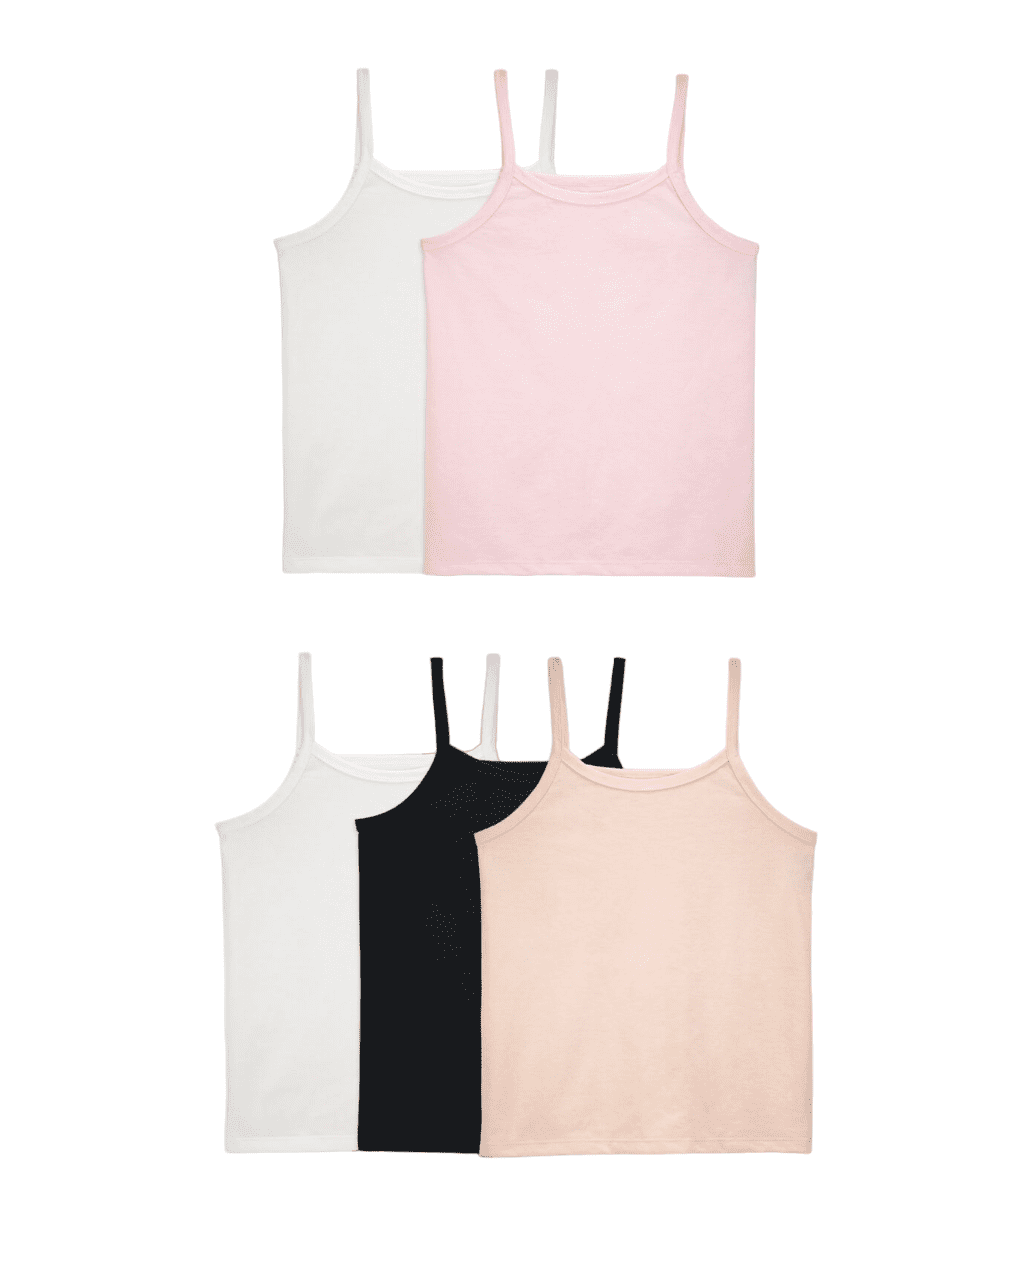 Girls' Spin Cami, Assorted 5 Pack